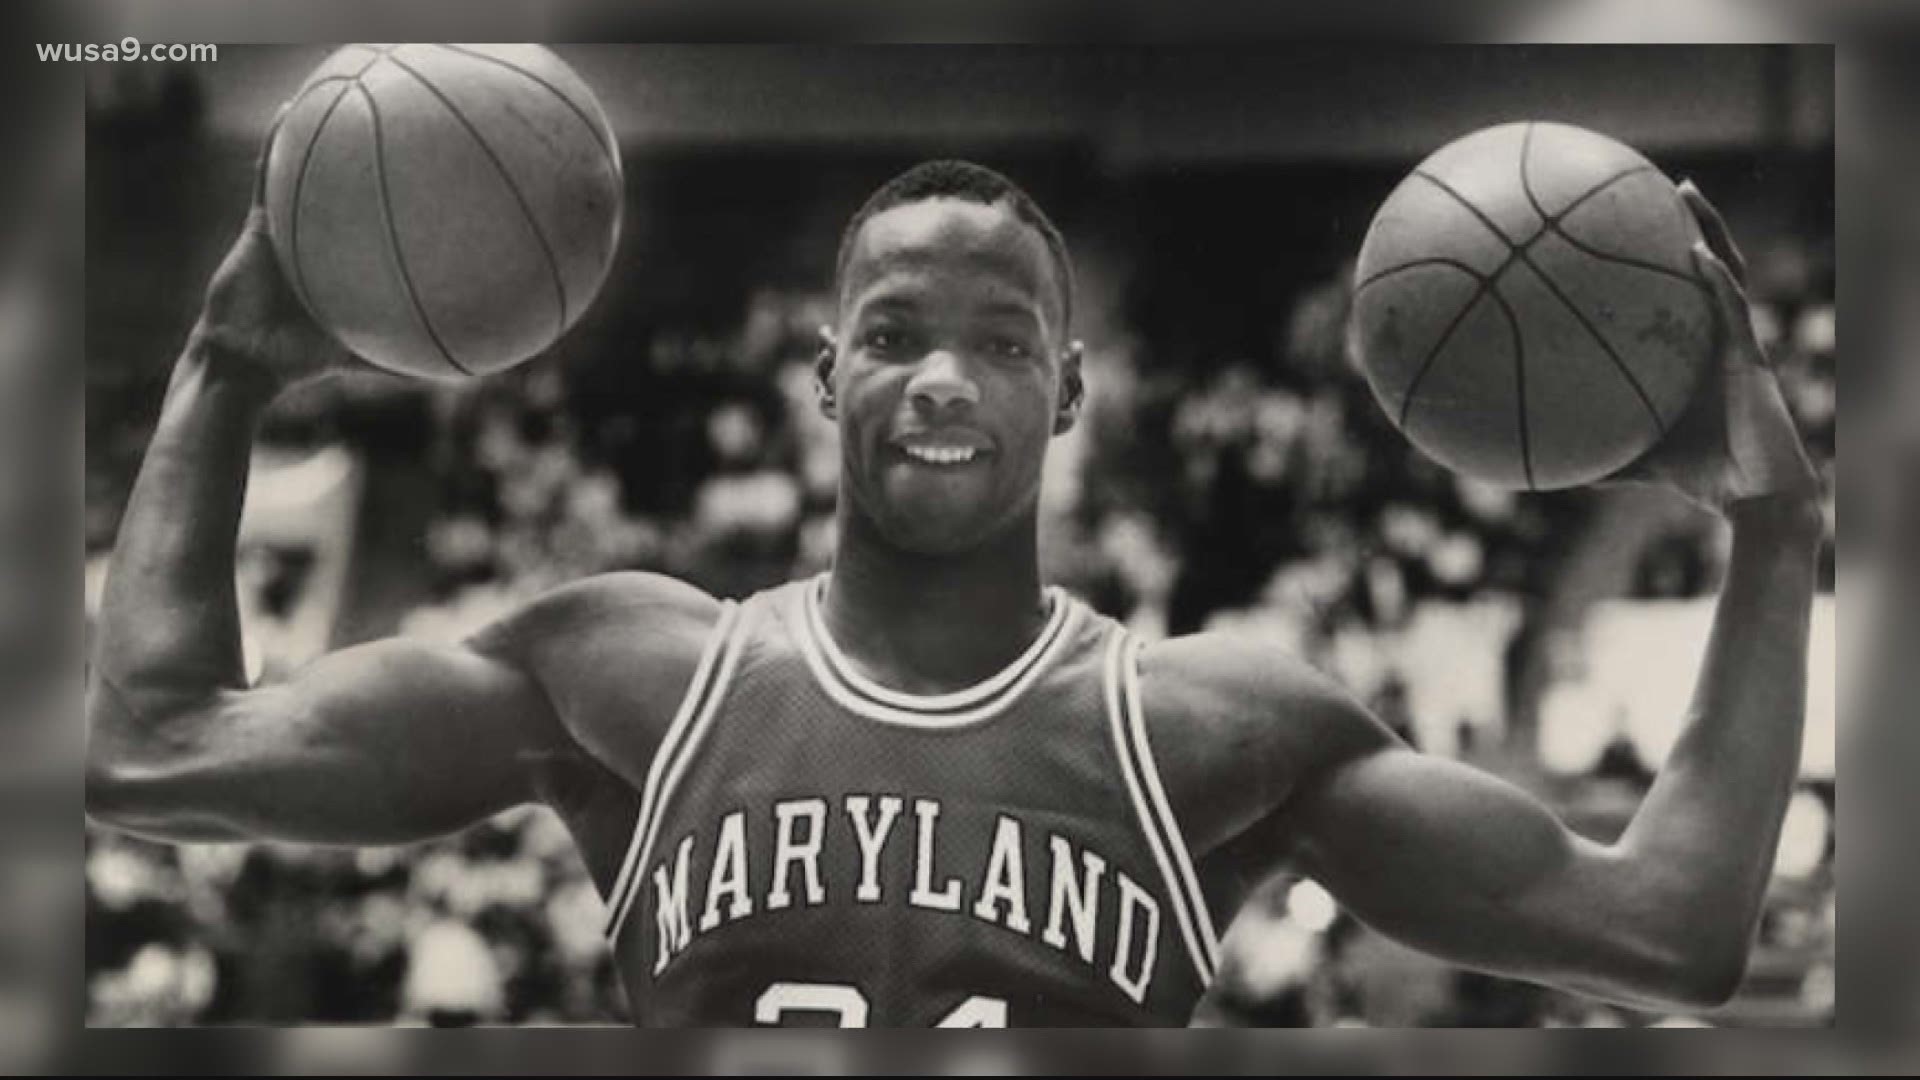 Len Bias is set to be inducted into the College Basketball Hall of Fame.